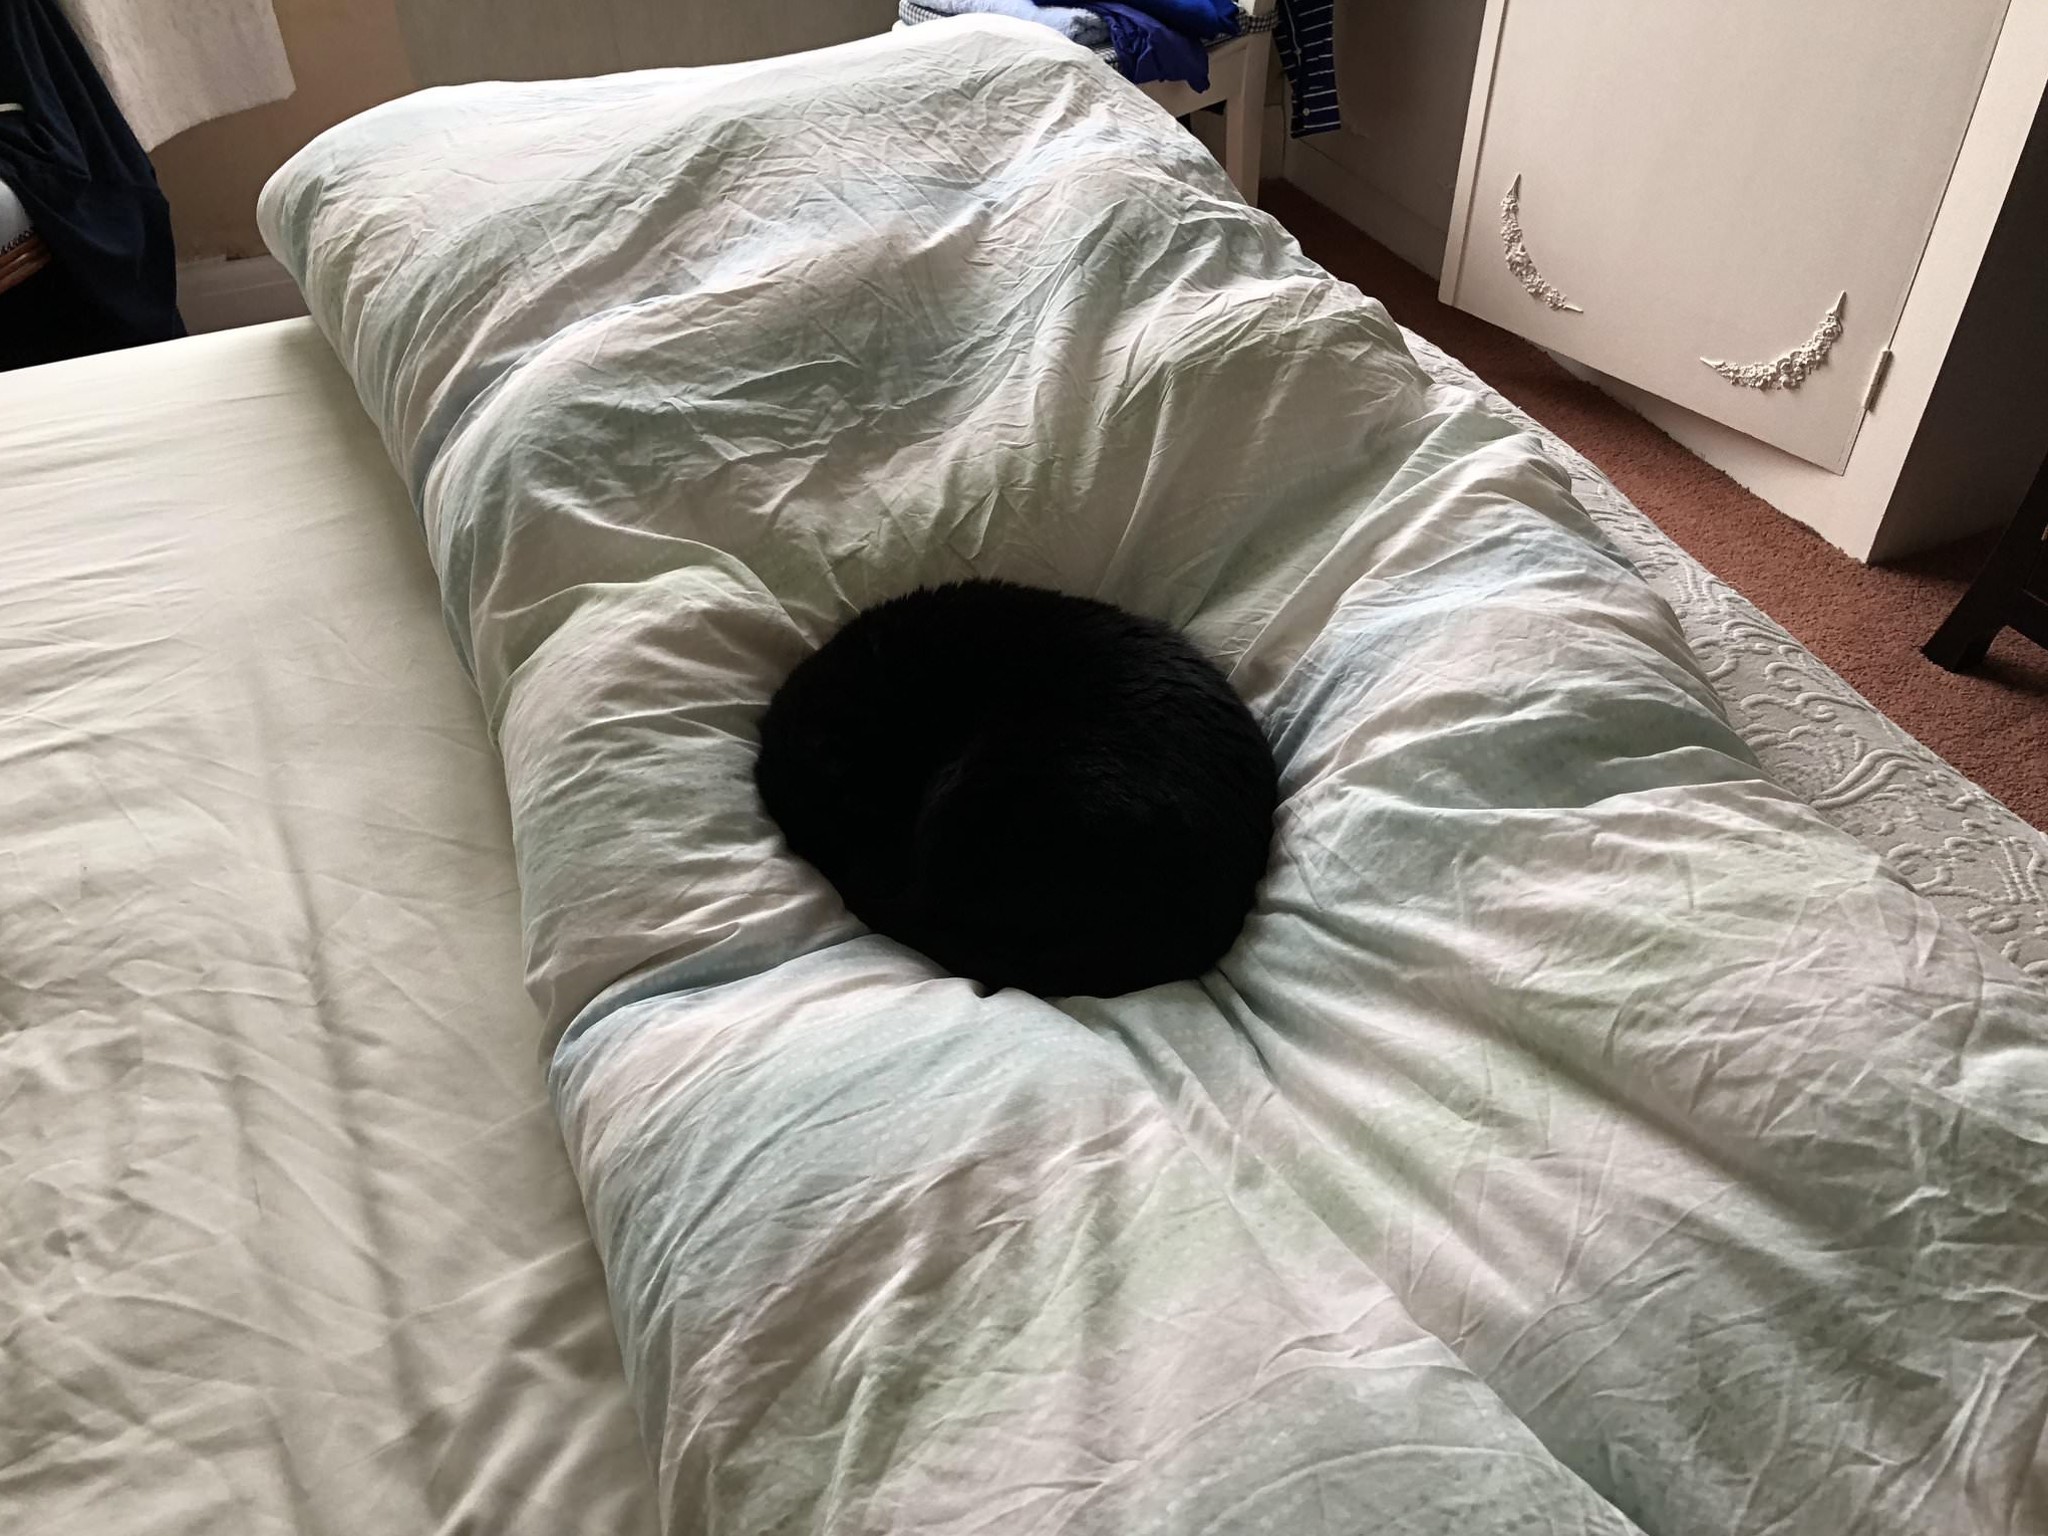 This cat looks like a black hole warping space-time.jpg